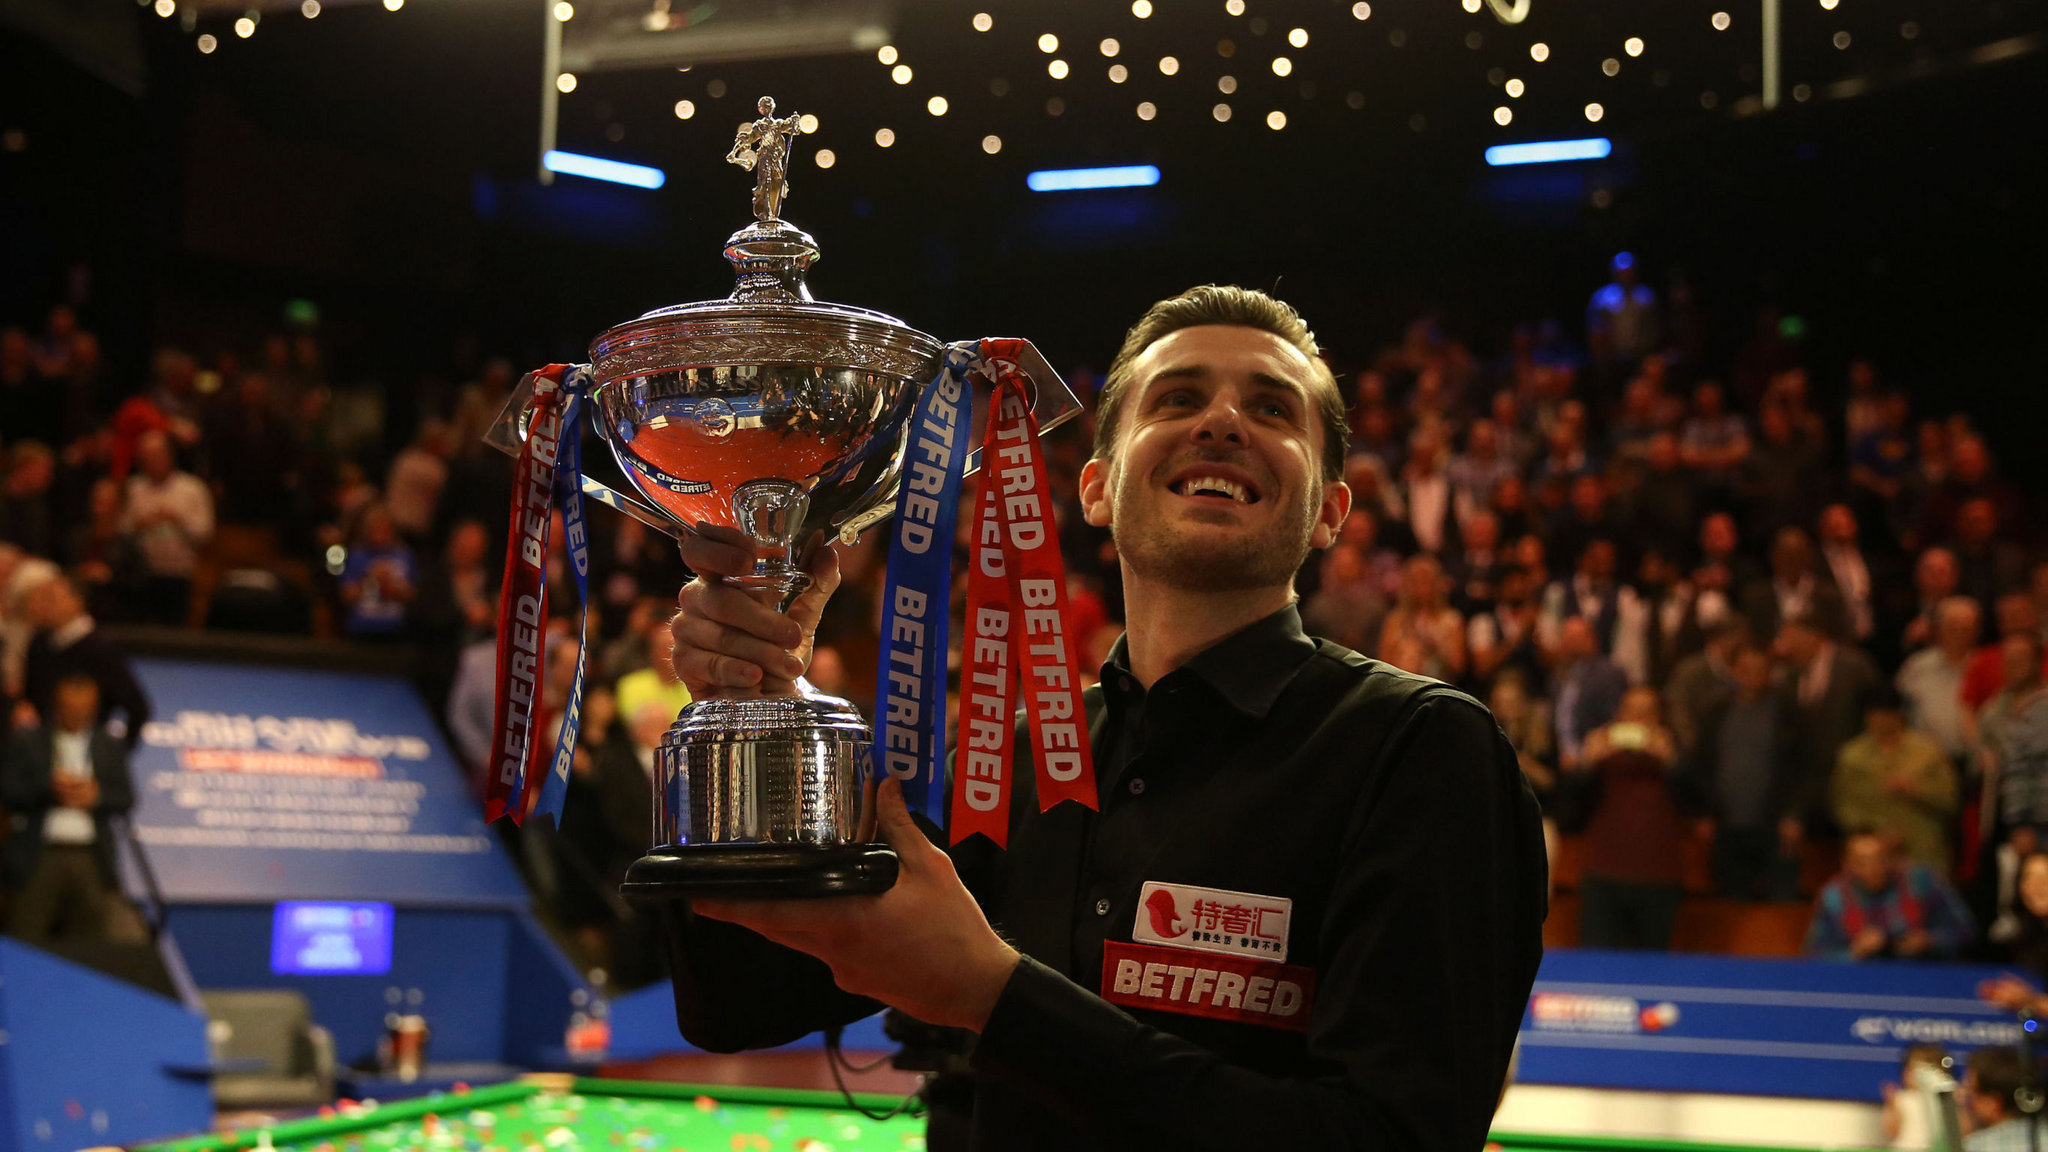 Snooker results and calendar for the 2016/17 season